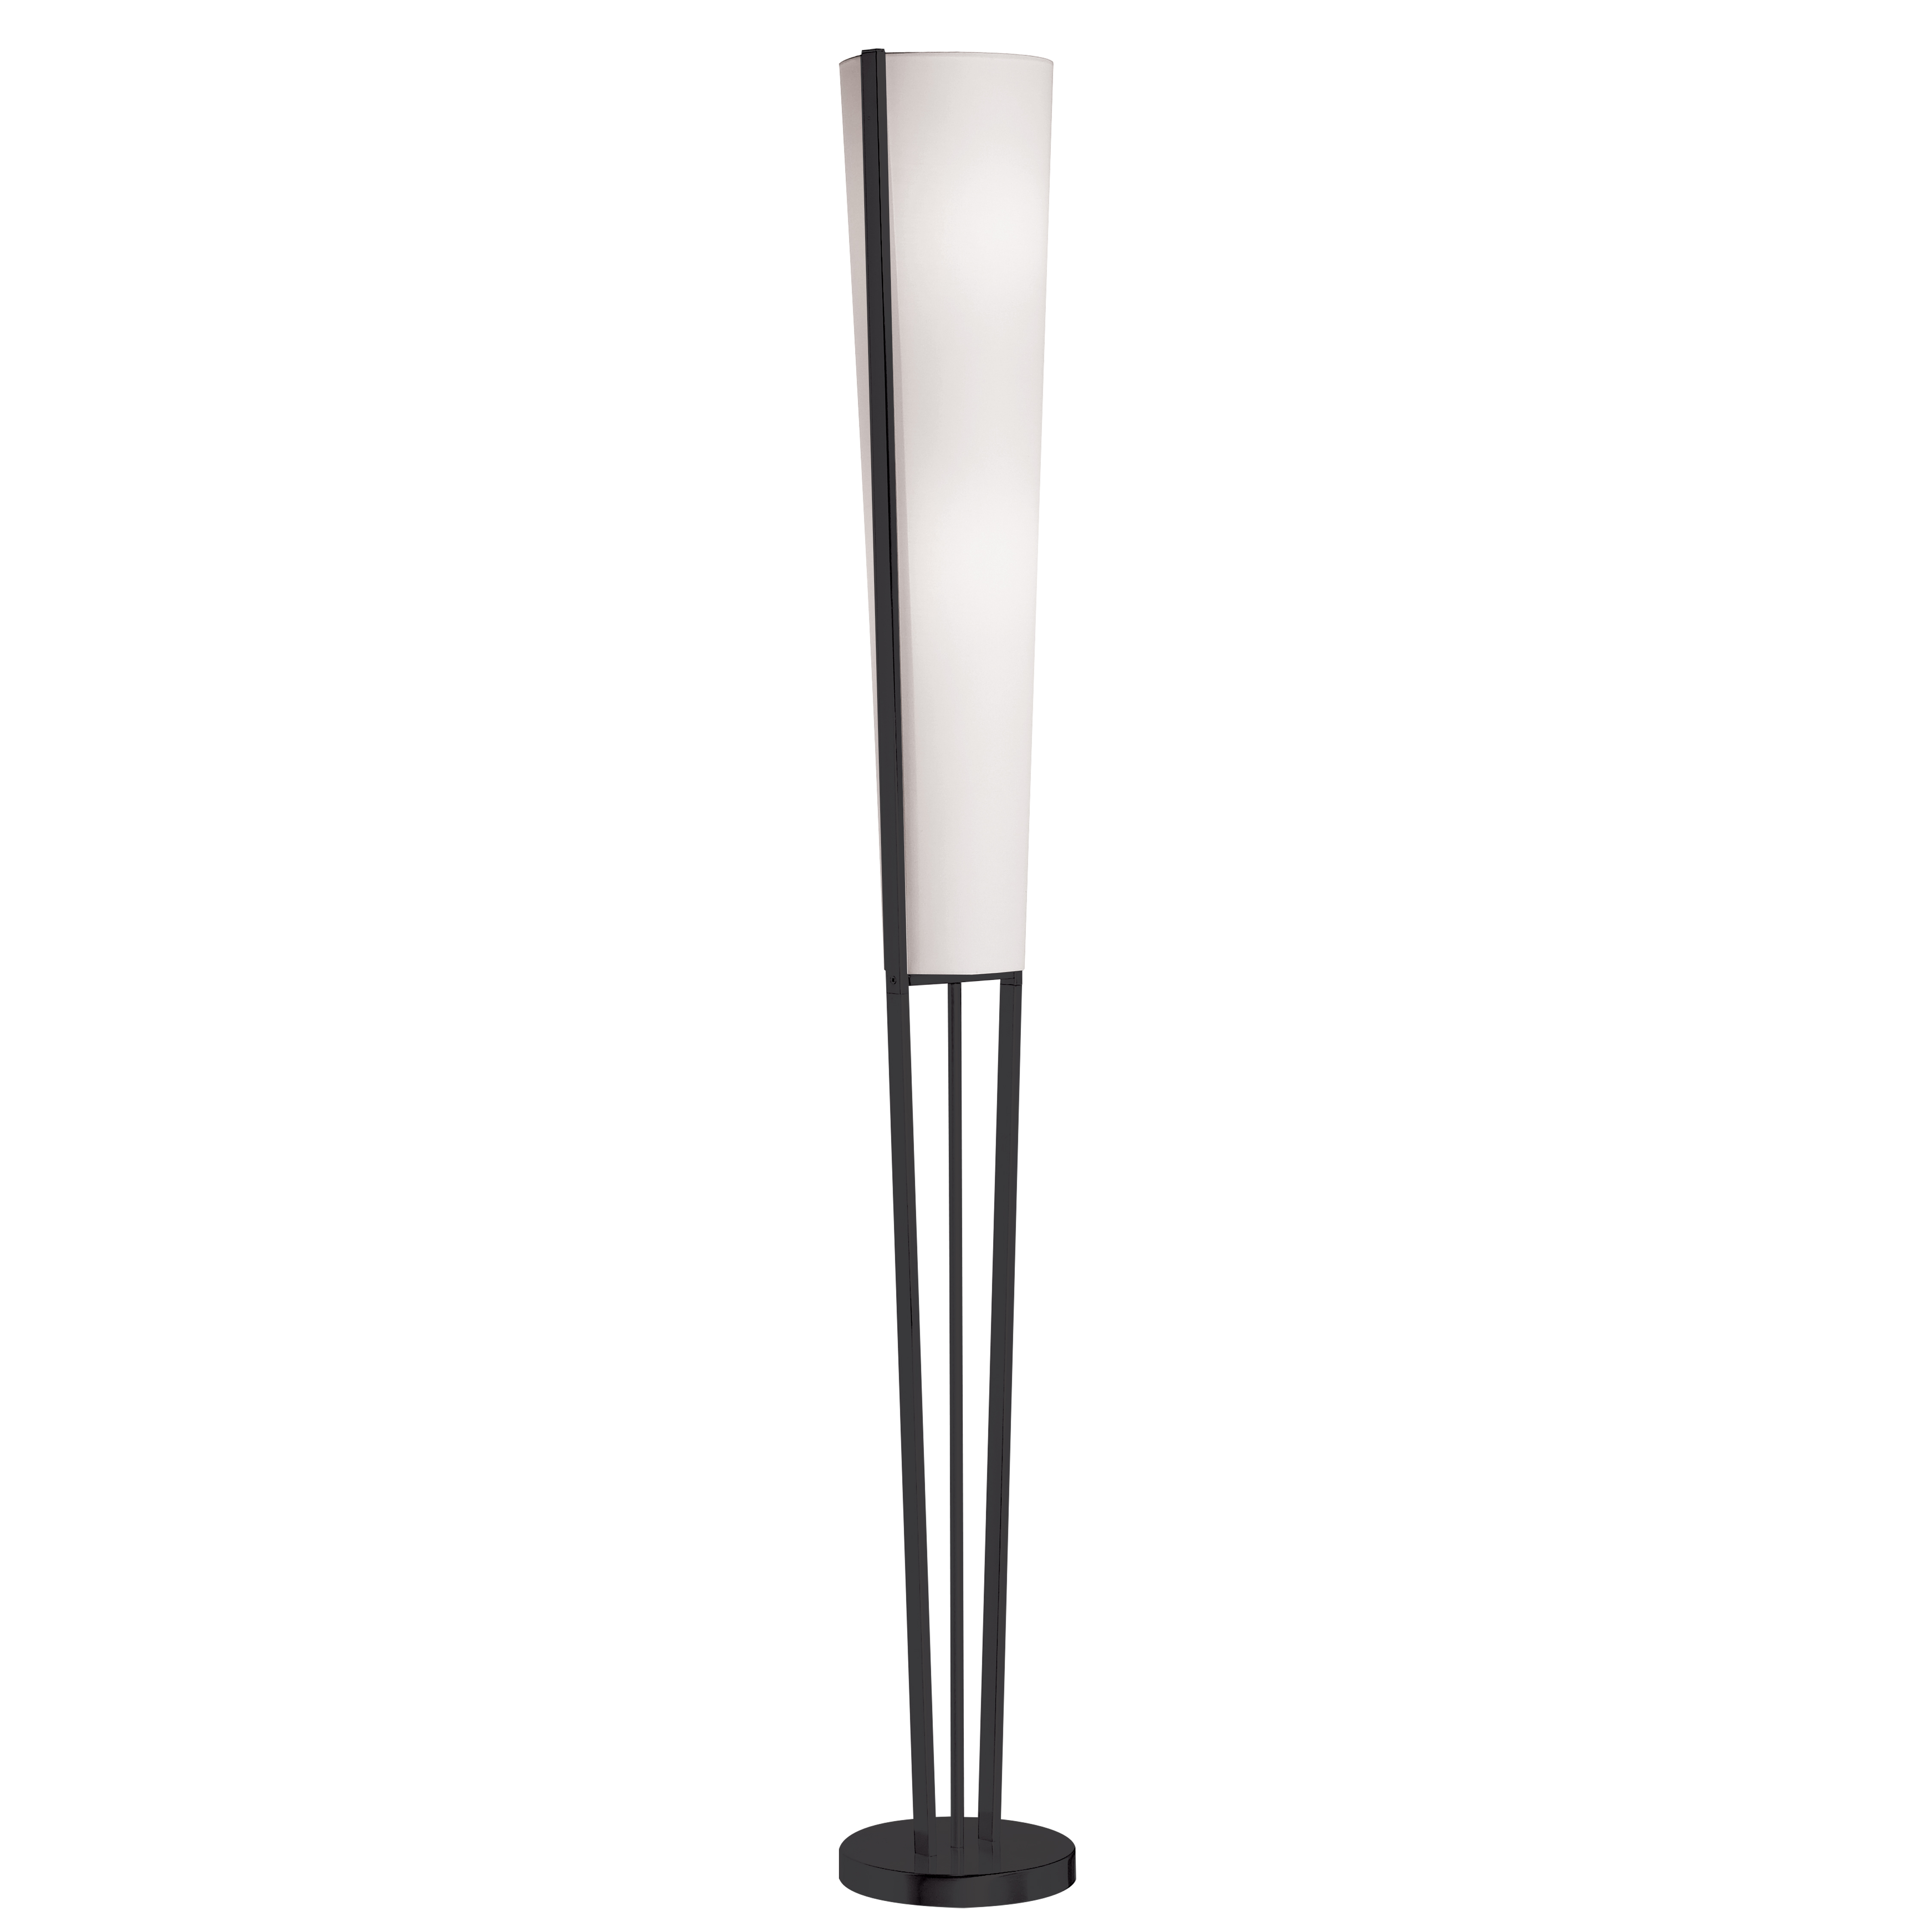 2LT Incand Floor Lamp, MB w/ WH Shade